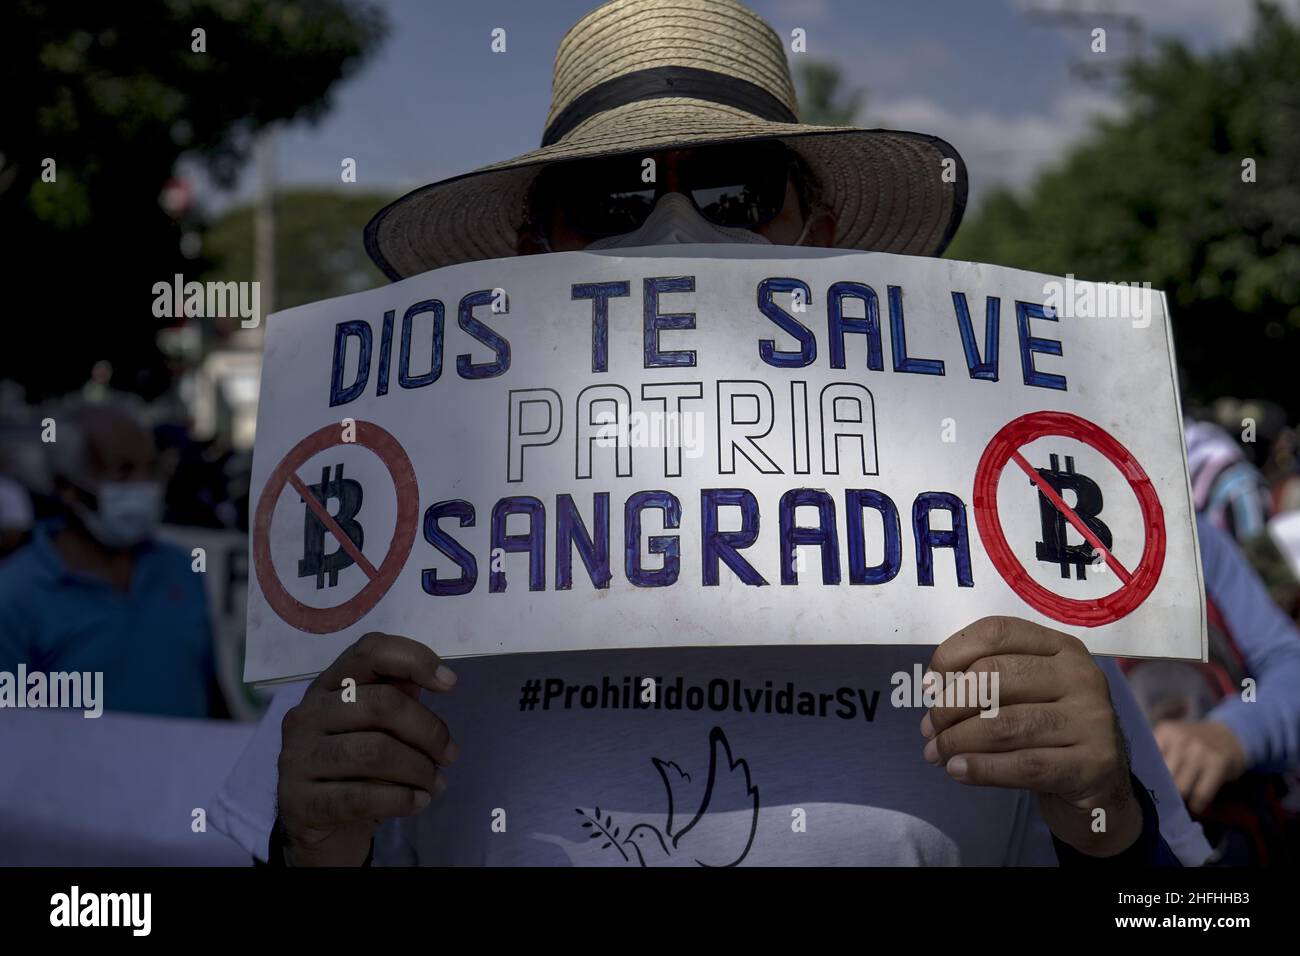 A man holds a sign against the Bitcoin law that says 'God bless you holly nation' during a march of war veterans and social movements to protest against the authoritarian policies of the Salvadoran government on the 30th anniversary of the signing of the peace accords.In 1992 El Salvador put an end to a 12 year war with a peace treaty signed in Mexico between the Salvadoran government and former guerrilla Frente Farabundo Martí para la Liberación Nacional (FMLN). President of El Salvador Nayib Bukele through his party in Congress voted a law to remove the anniversary as a national day. (Photo Stock Photo